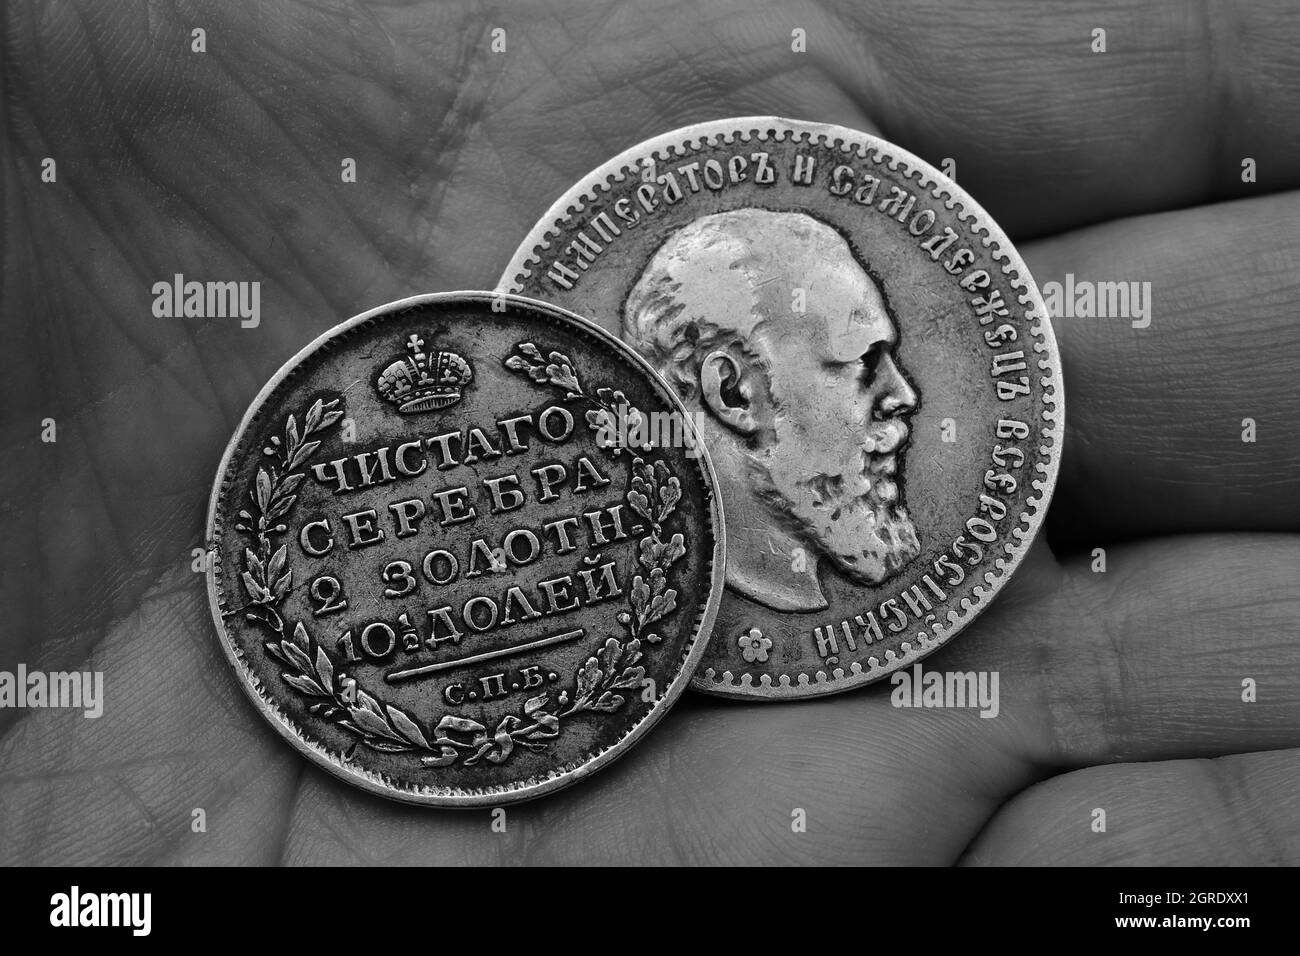 two old Russian silver coins of the 18th century in the palm, black and white photography Stock Photo